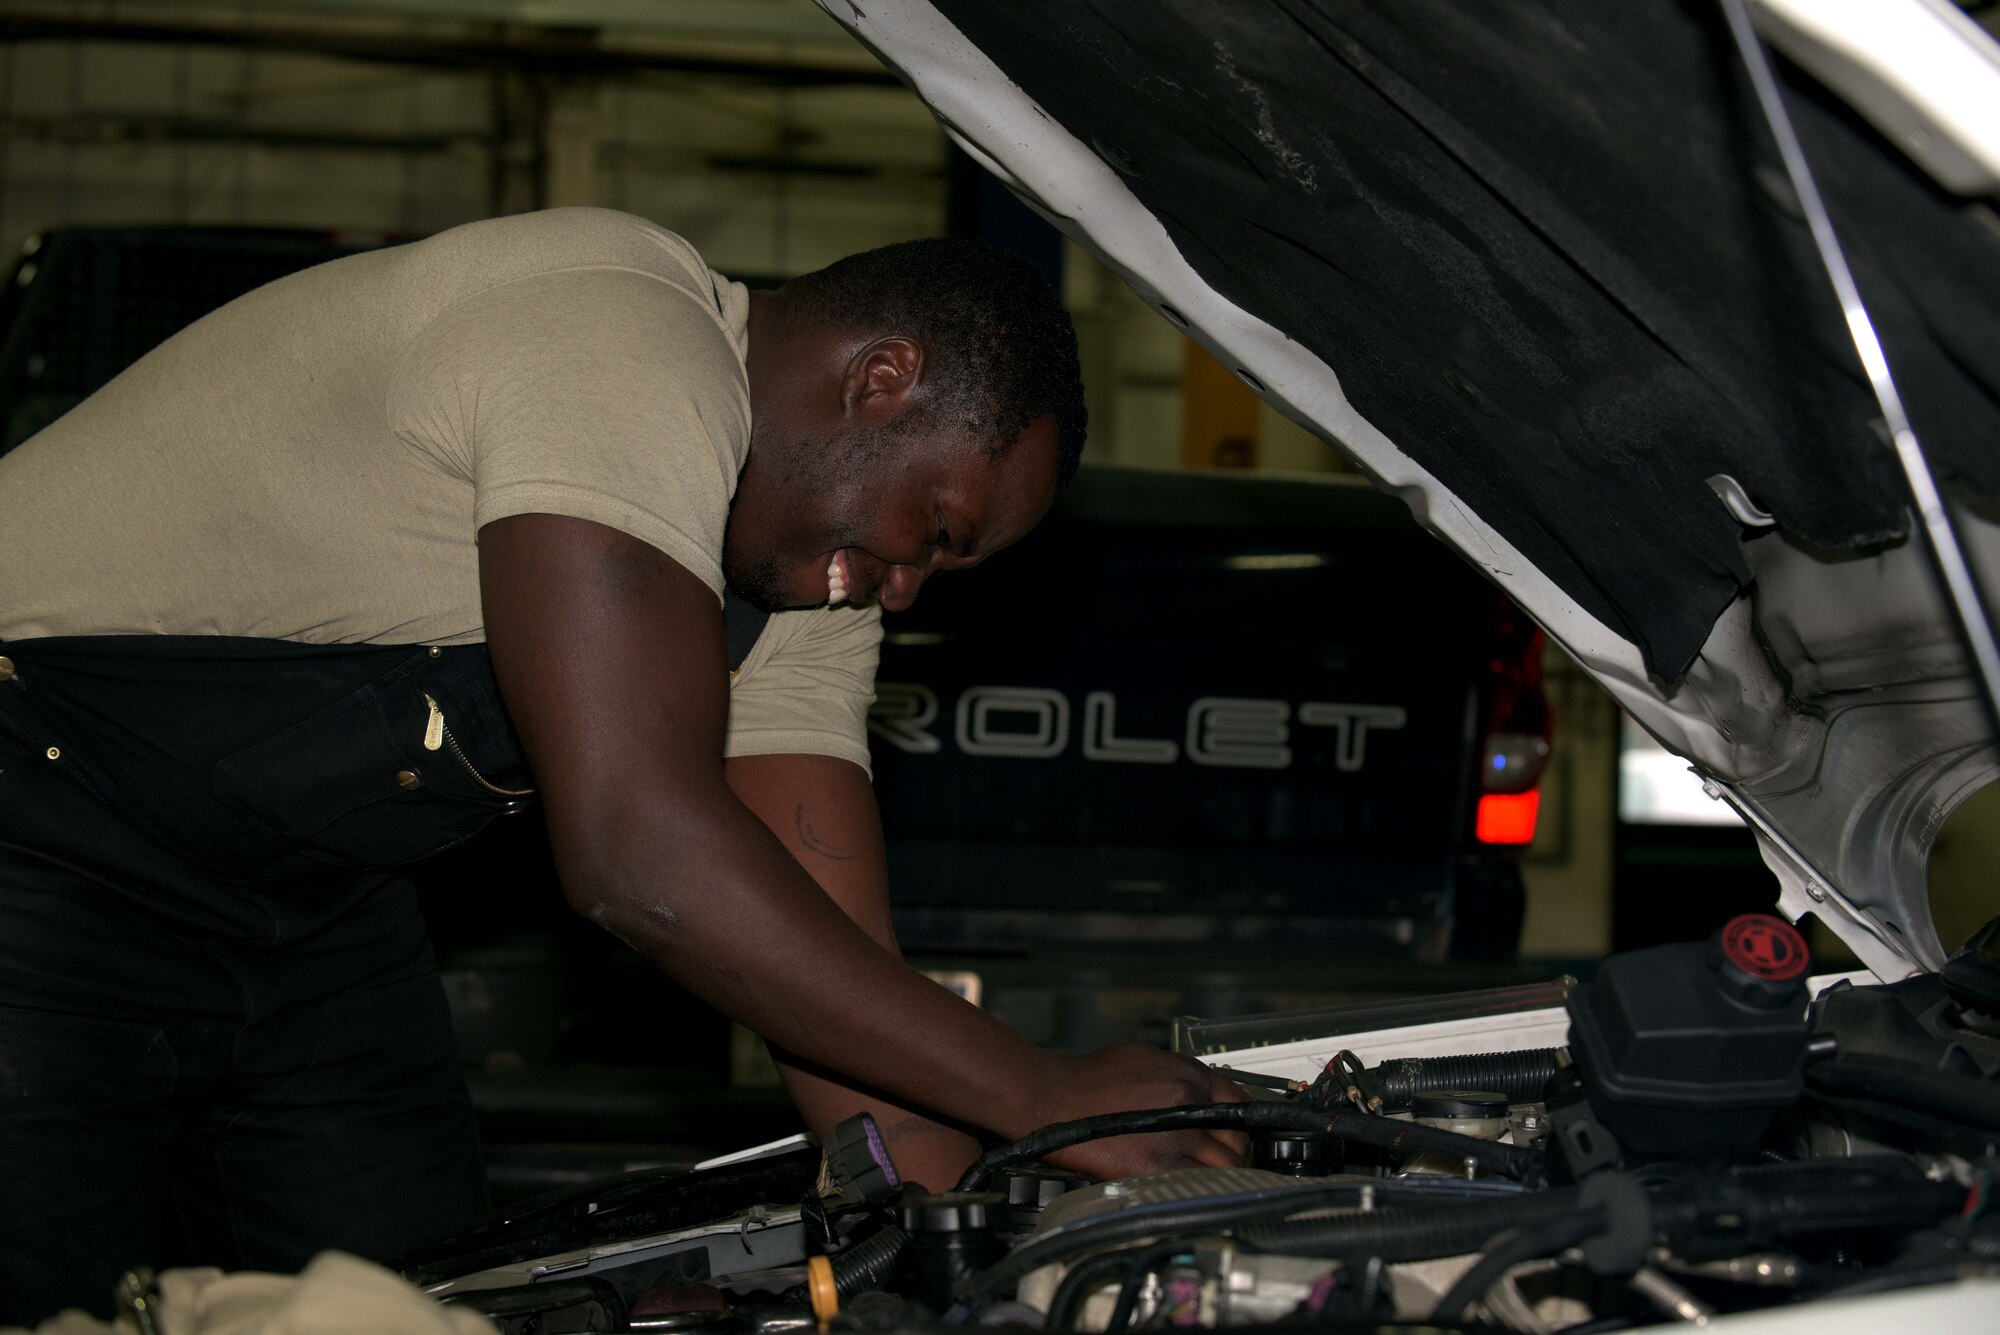 U.S. Air Force Staff Sgt. Markeith Roberson, 100th Logistics Readiness Squadron mission generating general purpose maintenance supervisor, works on an engine of a security forces vehicle at RAF Mildenhall, England, Jan. 29, 2018. Vehicle maintenance handles a wide variety of vehicles such as Humvees, cranes, vans and security forces vehicles. (U.S. Air Force photo by Airman 1st Class Benjamin Cooper)